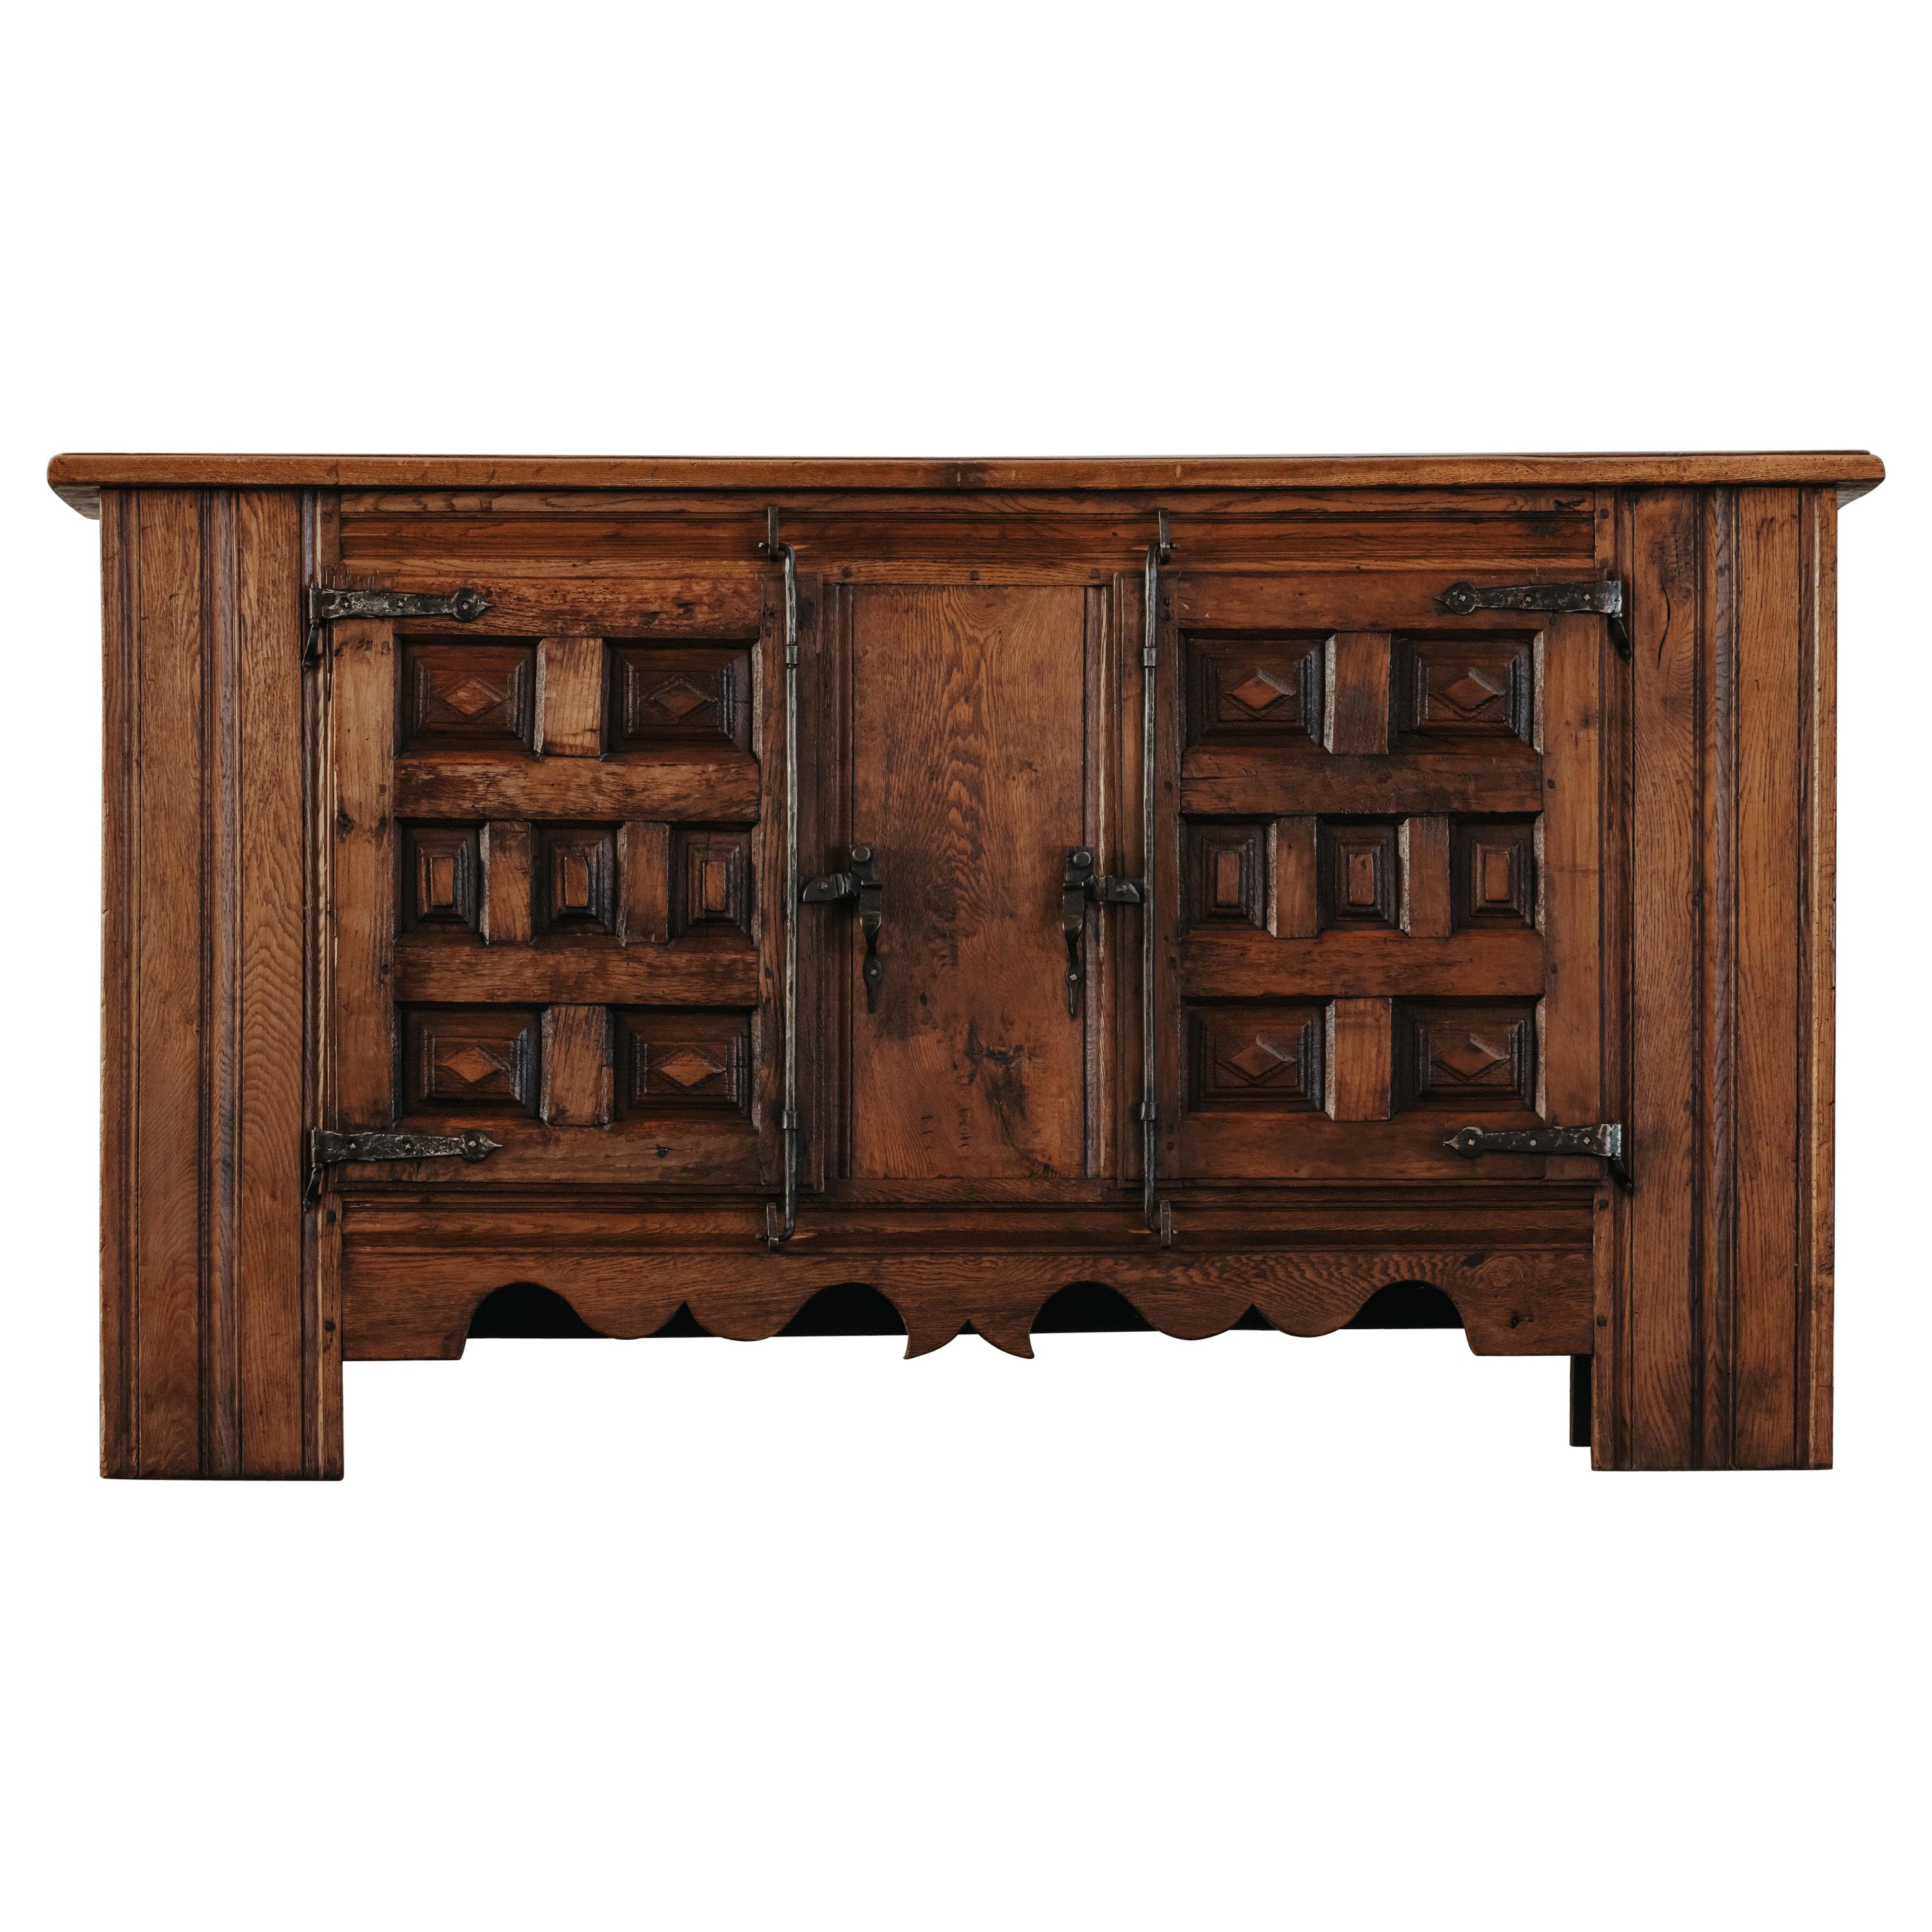 Early Oak Two Door Cabinet From Spain, Circa 1780